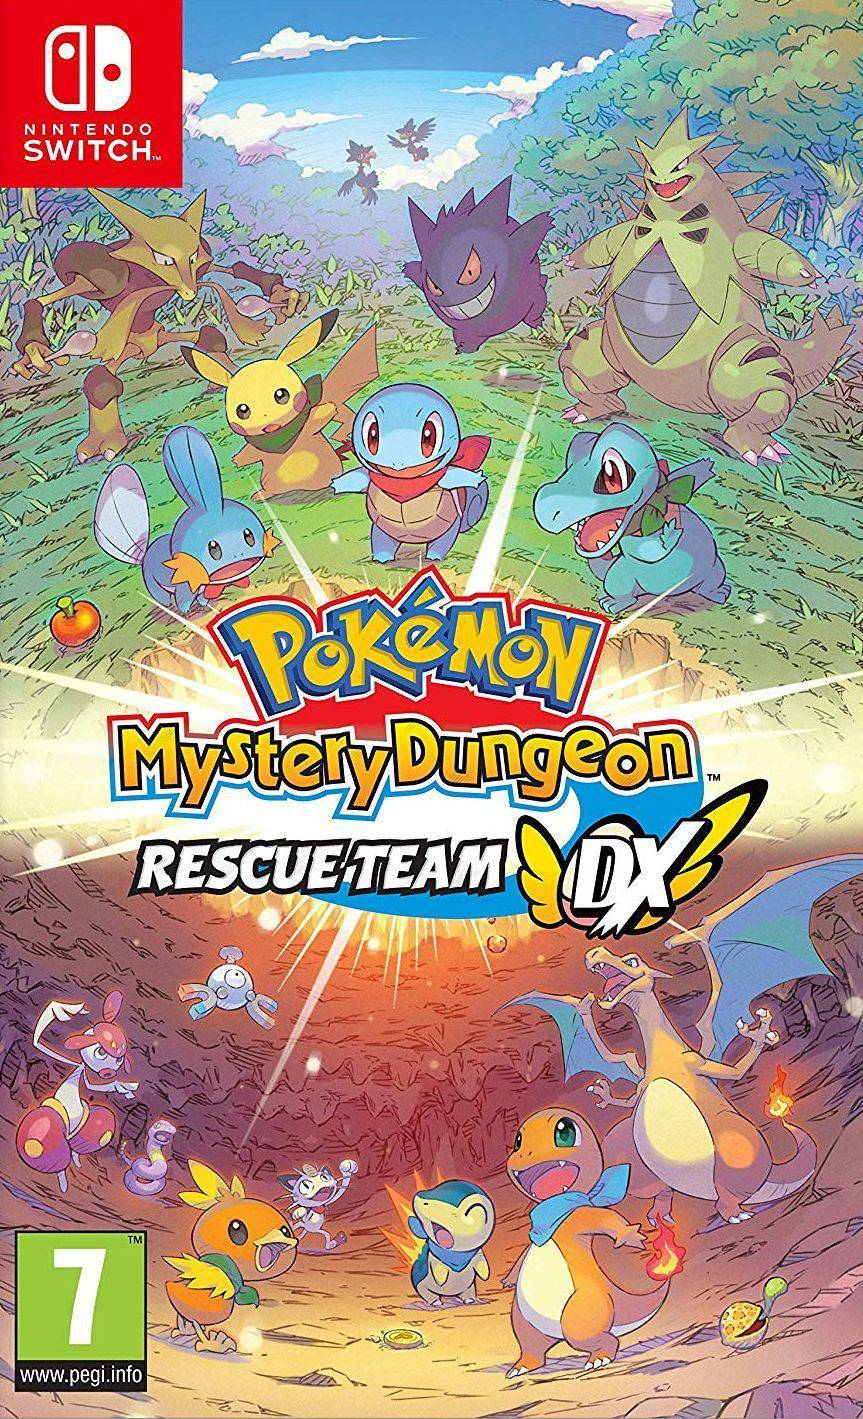 Switch Pokemon Mystery Dungeon Rescue Team Dx - Albagame